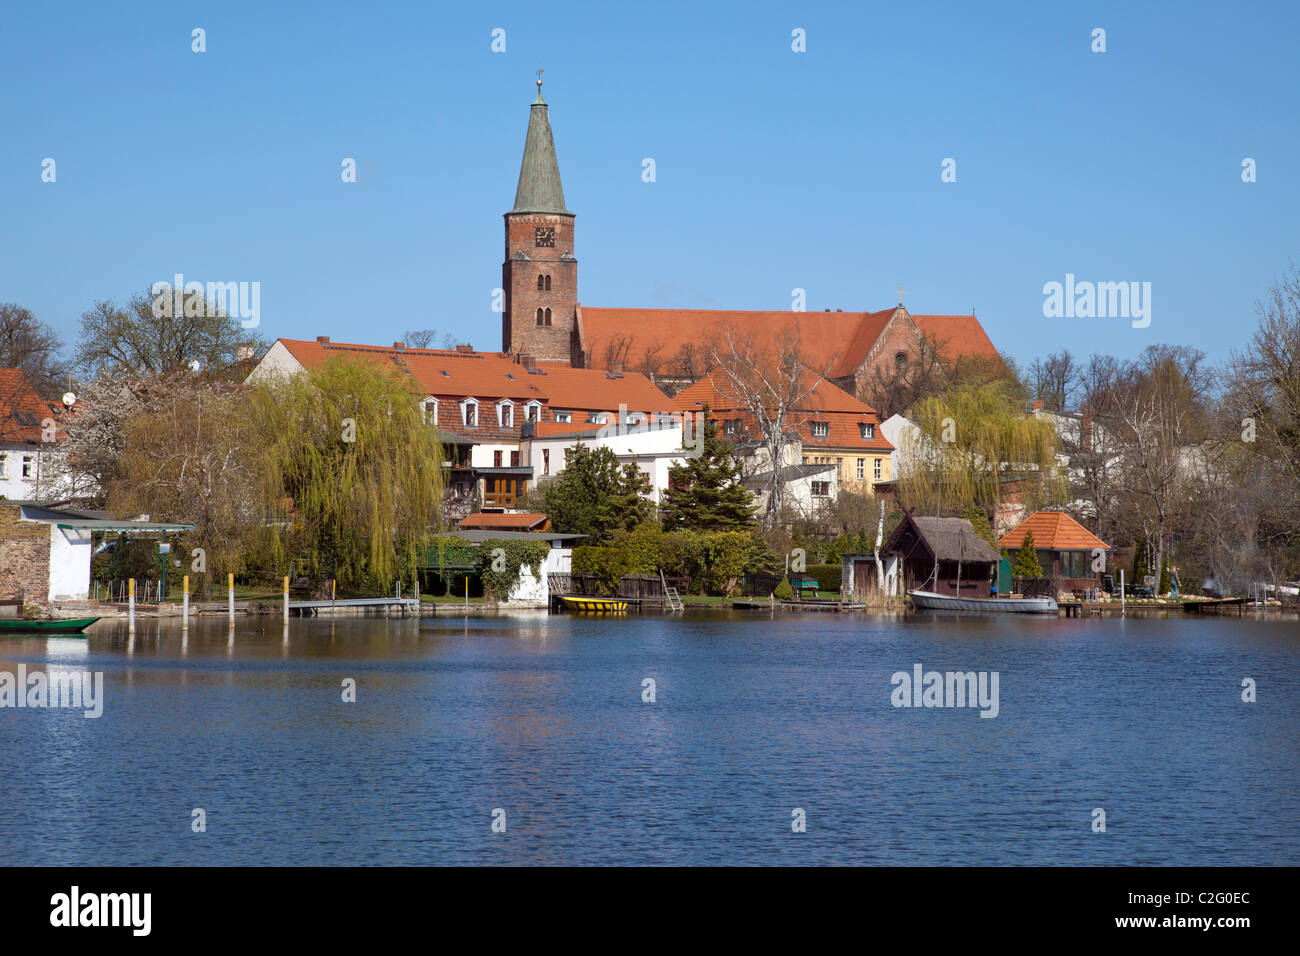 Dominsel with Dom St Peter and Paul, Brandenburg an der Havel, Germany Stock Photo